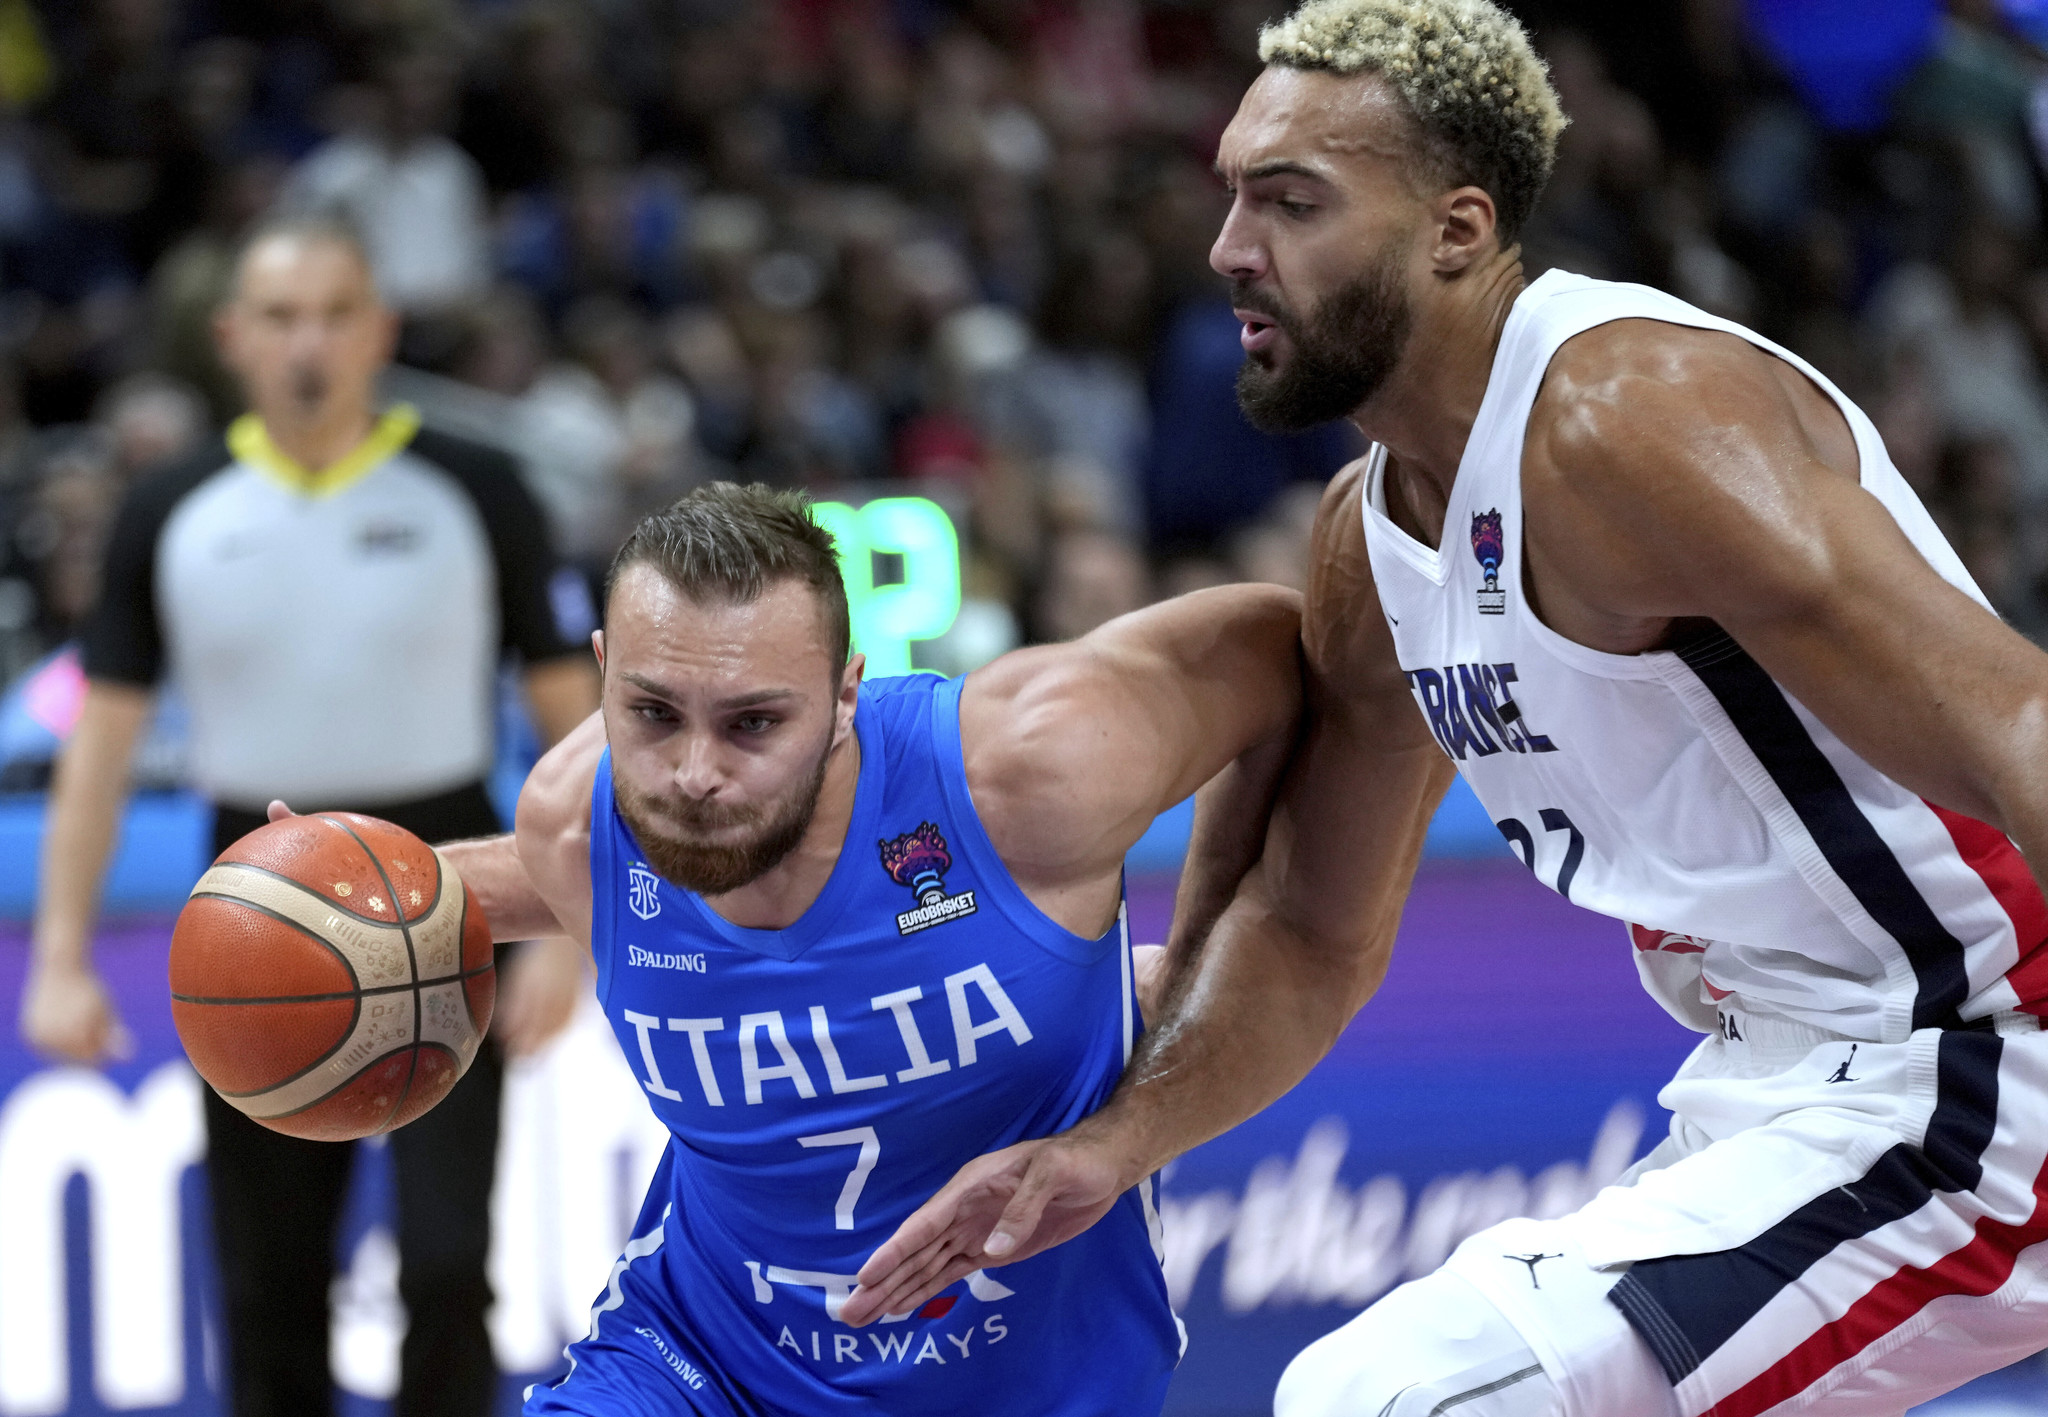 Italy's Sefano Tonut, left, is challenged by Rudy Gobert of France, right, during the Eurobasket quarter final basketball match between France and Italy in  lt;HIT gt;Berlin lt;/HIT gt;, Germany, Wednesday, Sept. 14, 2022. (AP Photo/Michael Sohn)